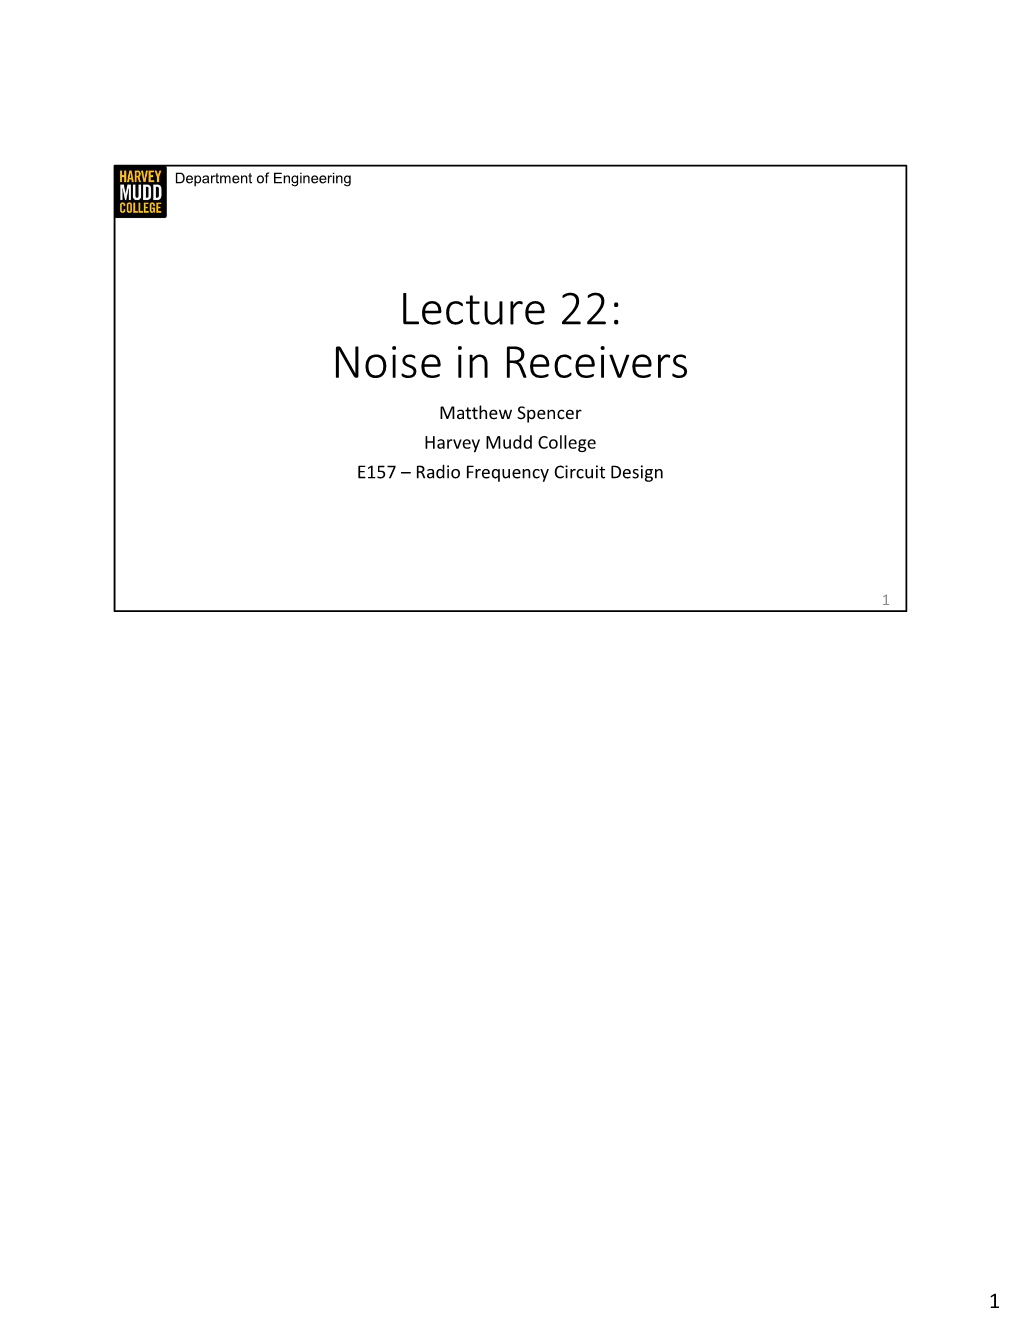 Lecture 22: Noise in Receivers Matthew Spencer Harvey Mudd College E157 – Radio Frequency Circuit Design